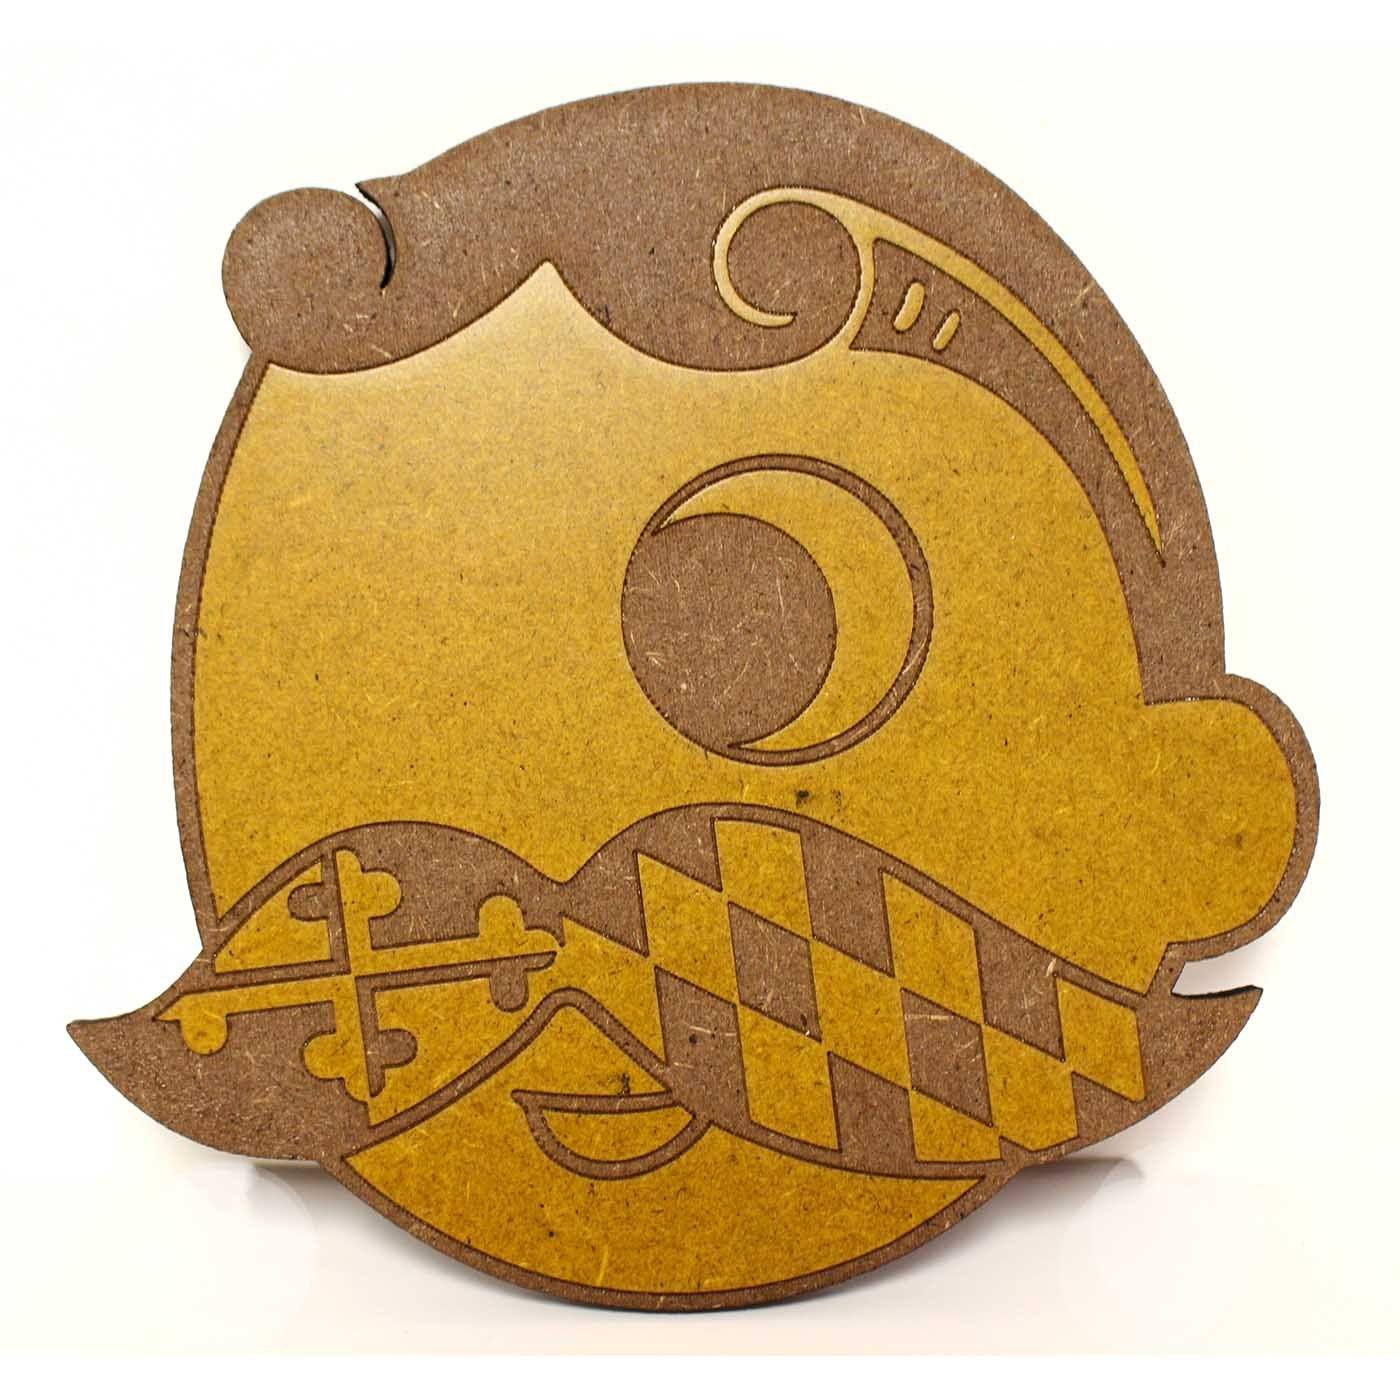 Natty Boh Logo (Maryland Mustache) / Wooden Coaster - Route One Apparel